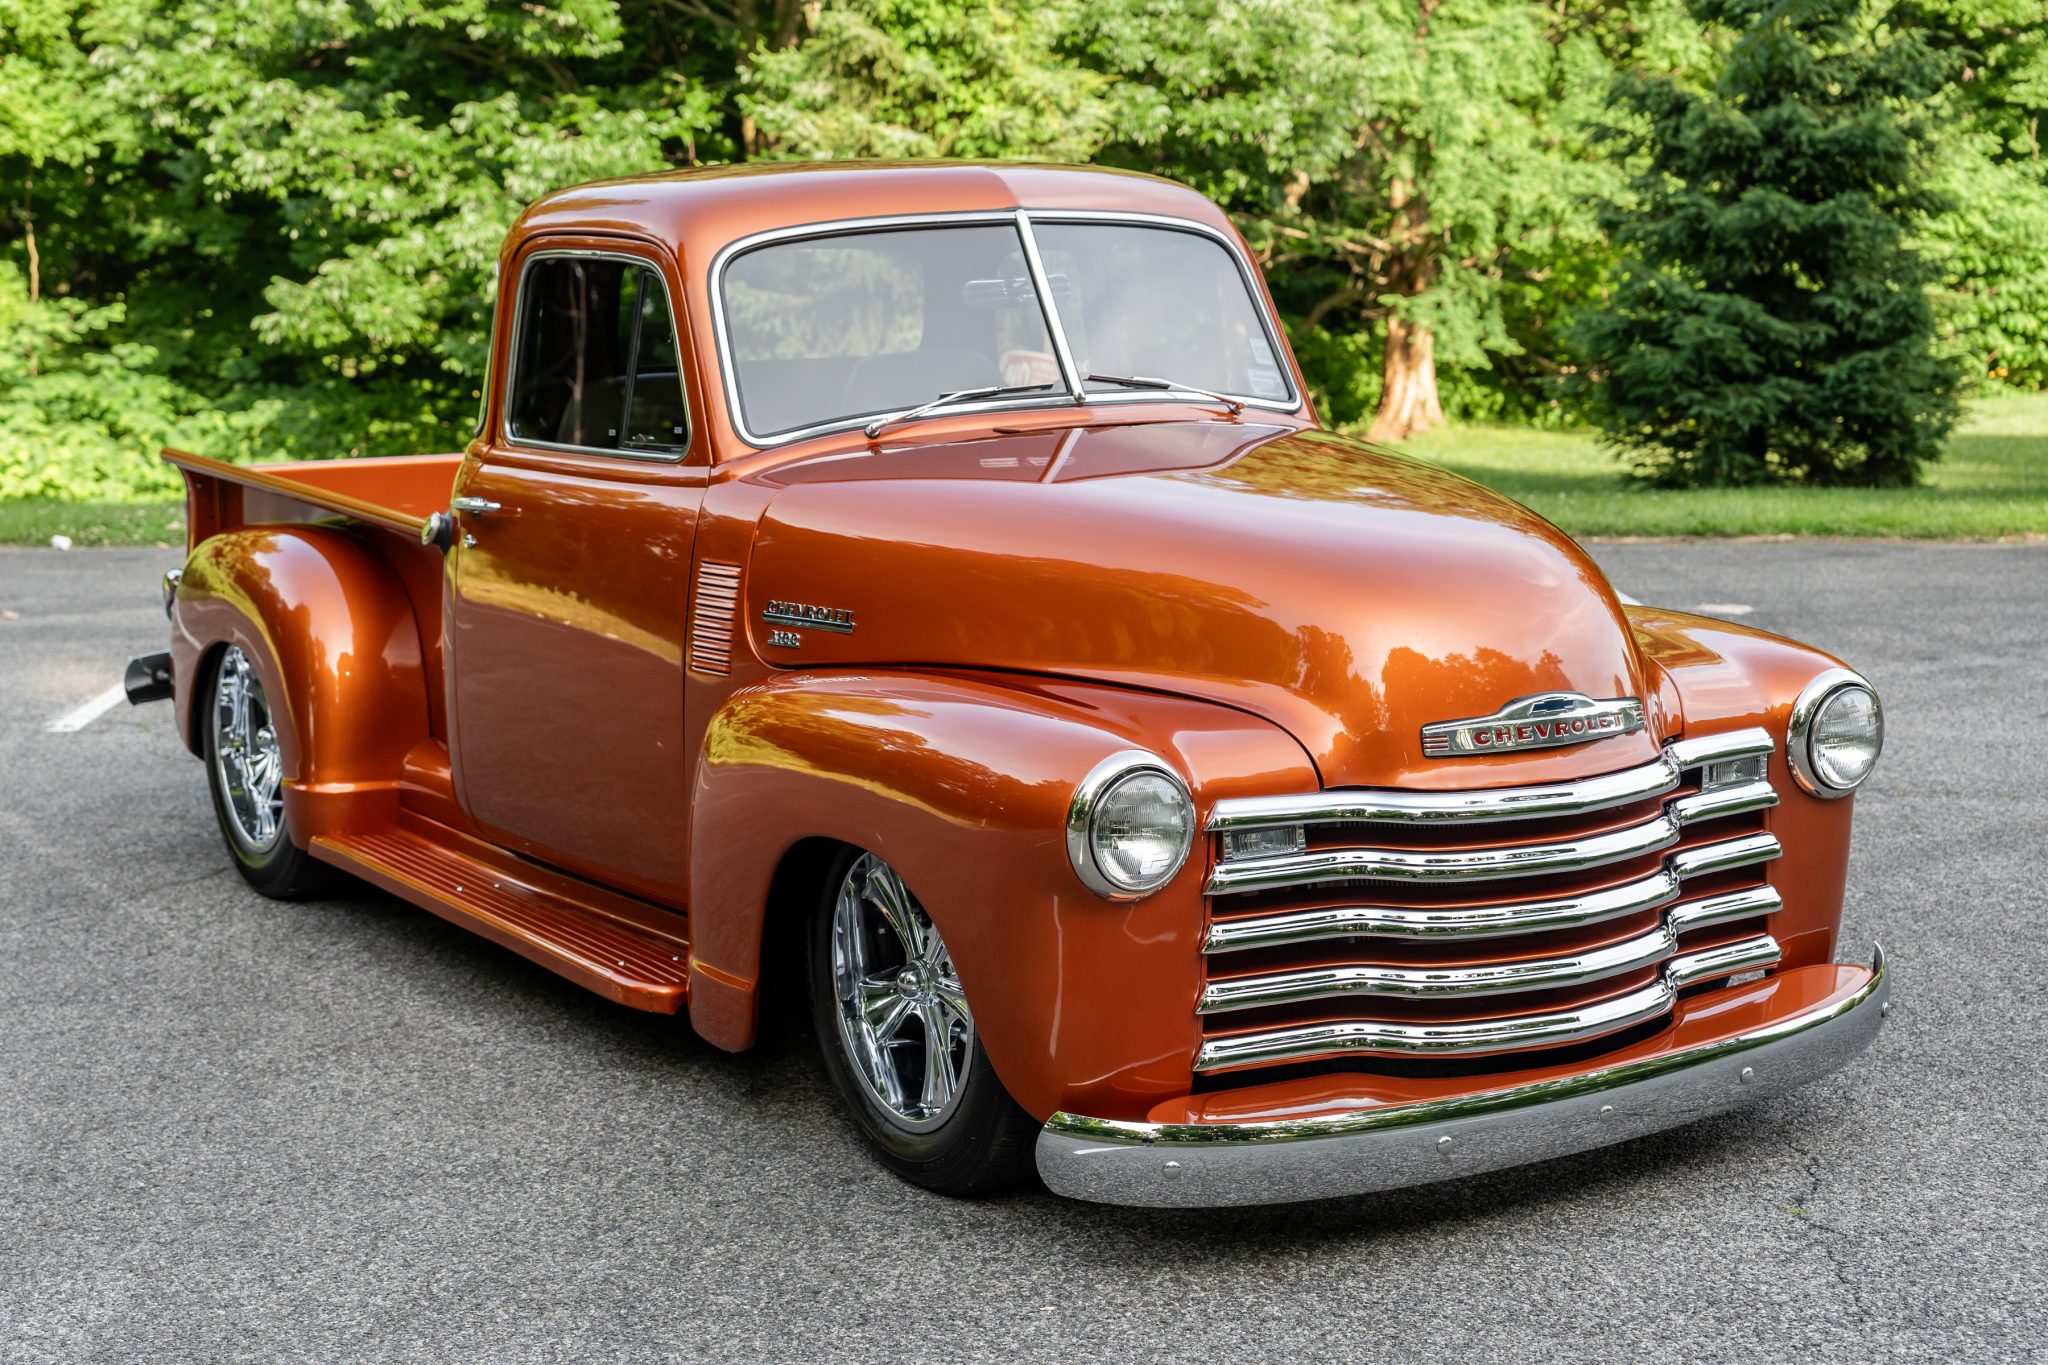 Used Modified 1951 Chevrolet 3100 5-Window Pickup Review